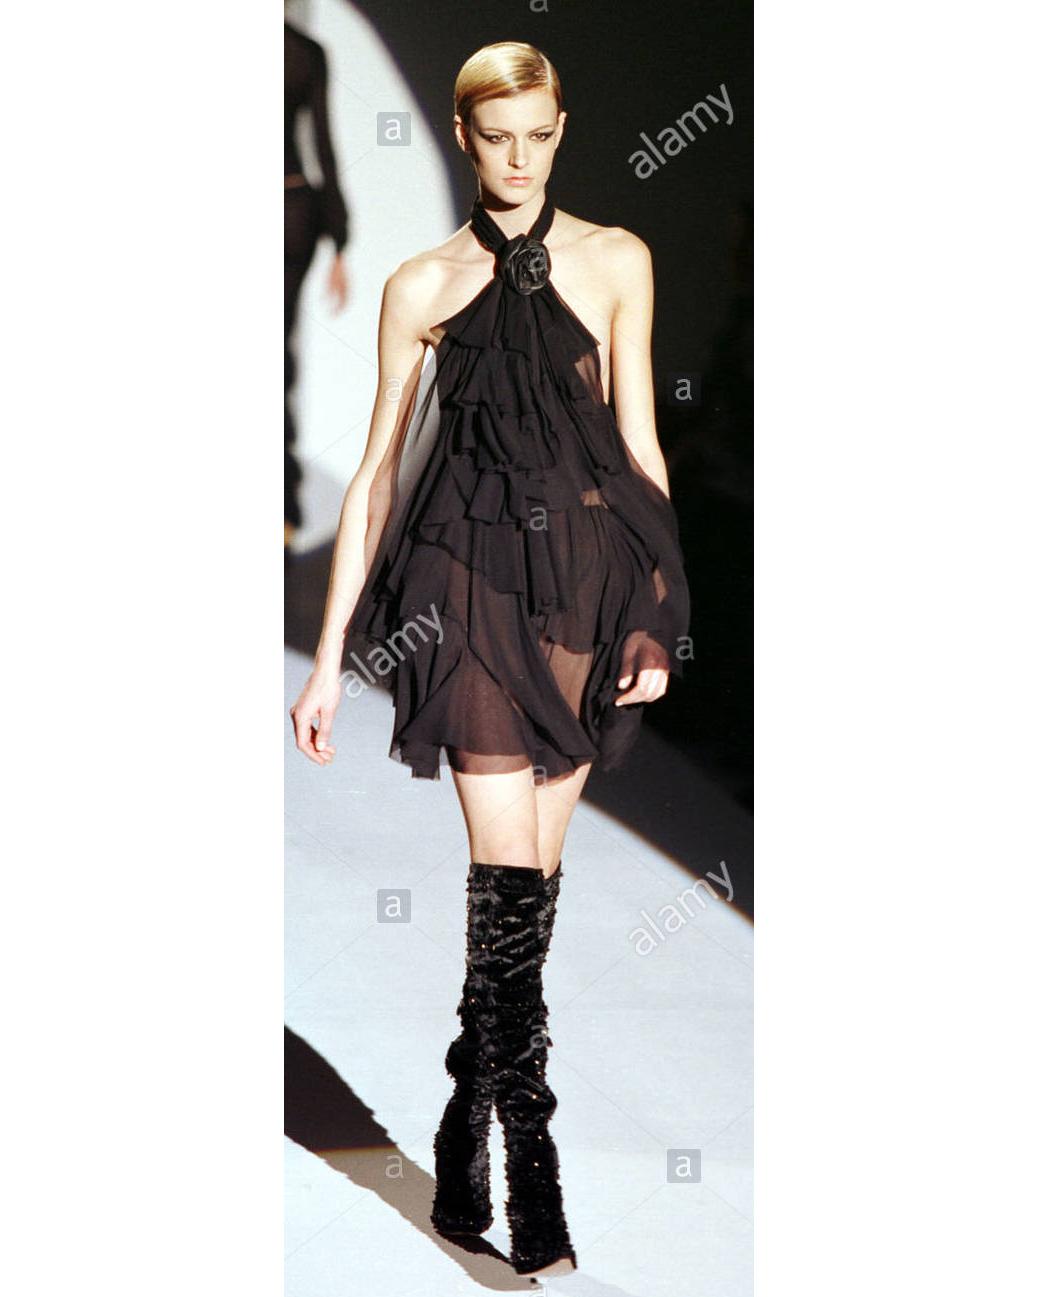 ▪ Gucci black embellished over knee boots
▪ Designed by Tom Ford
▪ Pointed toe 
▪ Brown wooden heel 
▪ Zipper with leather pull at inseam
▪ Hand-sewn black beads throughout 
▪ Size EU 38 C
▪ Fall-Winter 1999